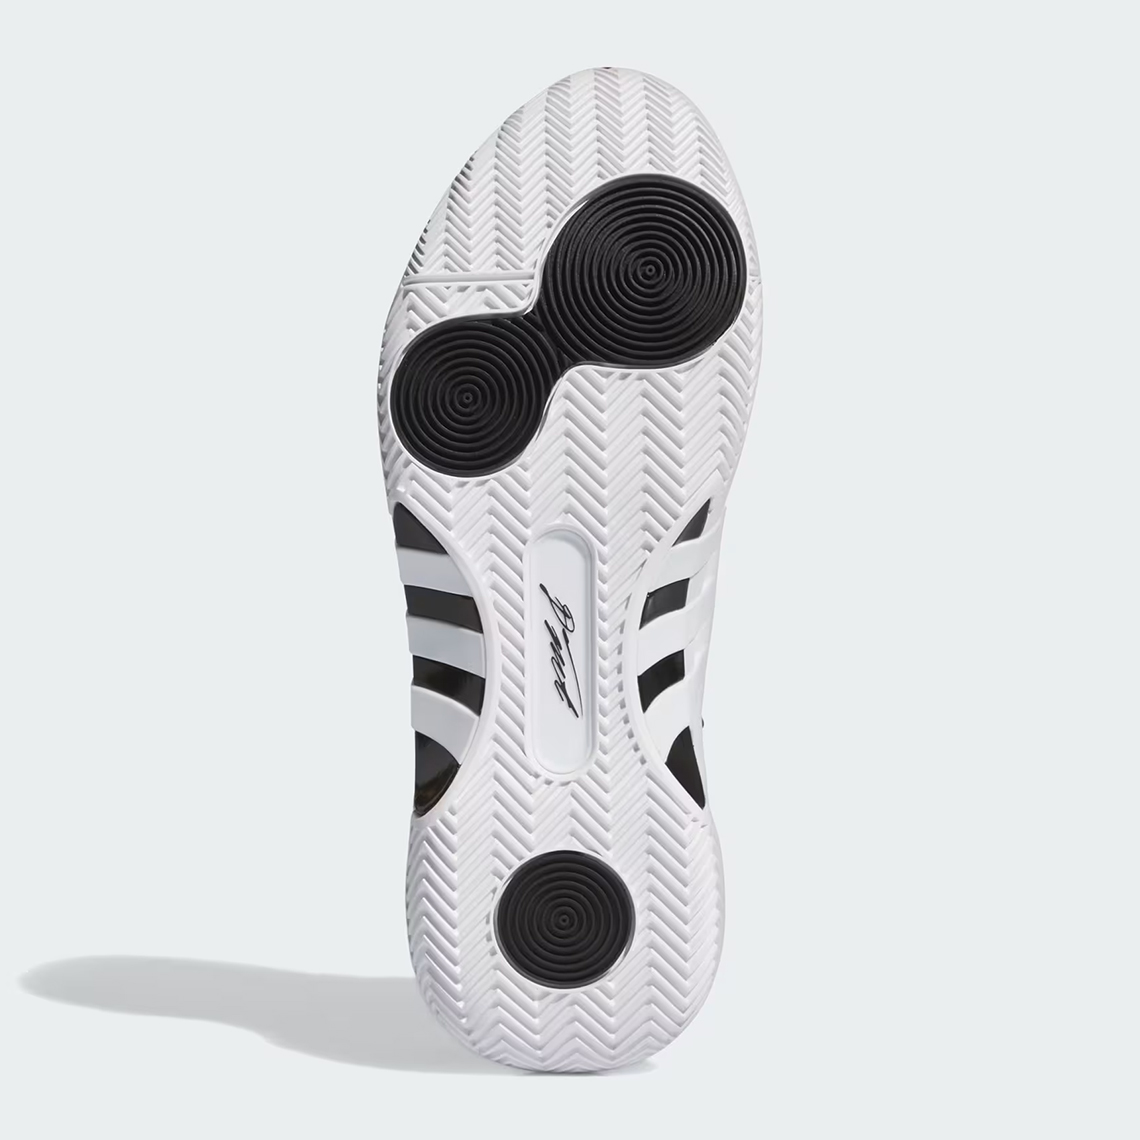 Adidas Don Issue 5 Stormtrooper Ie8333 Release Date 5